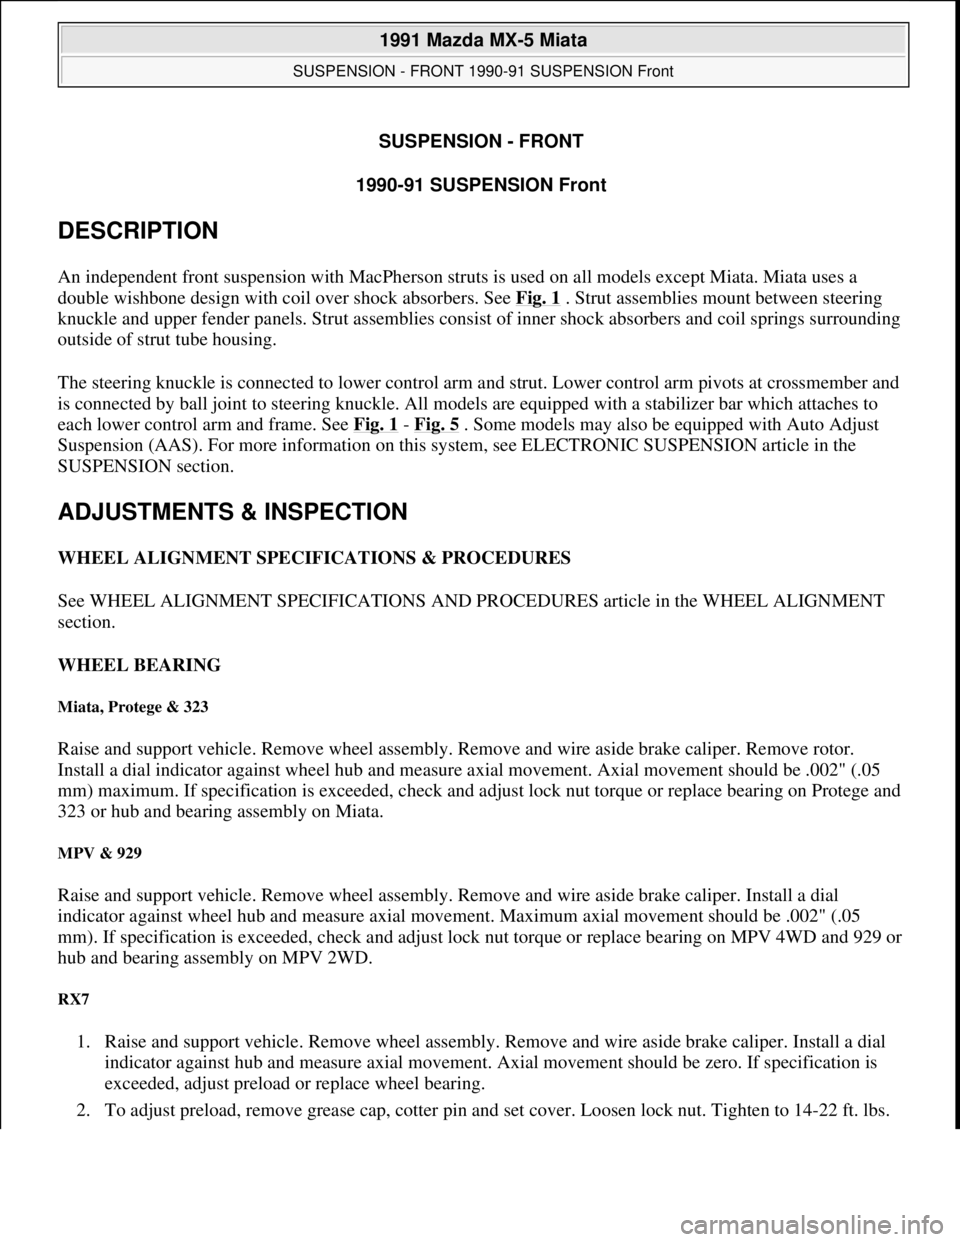 MAZDA MIATA 1991  Factory Service Manual SUSPENSION - FRONT
1990-91 SUSPENSION Front 
DESCRIPTION 
An independent front suspension with MacPherson struts is used on all models except Miata. Miata uses a 
double wishbone design with coil over